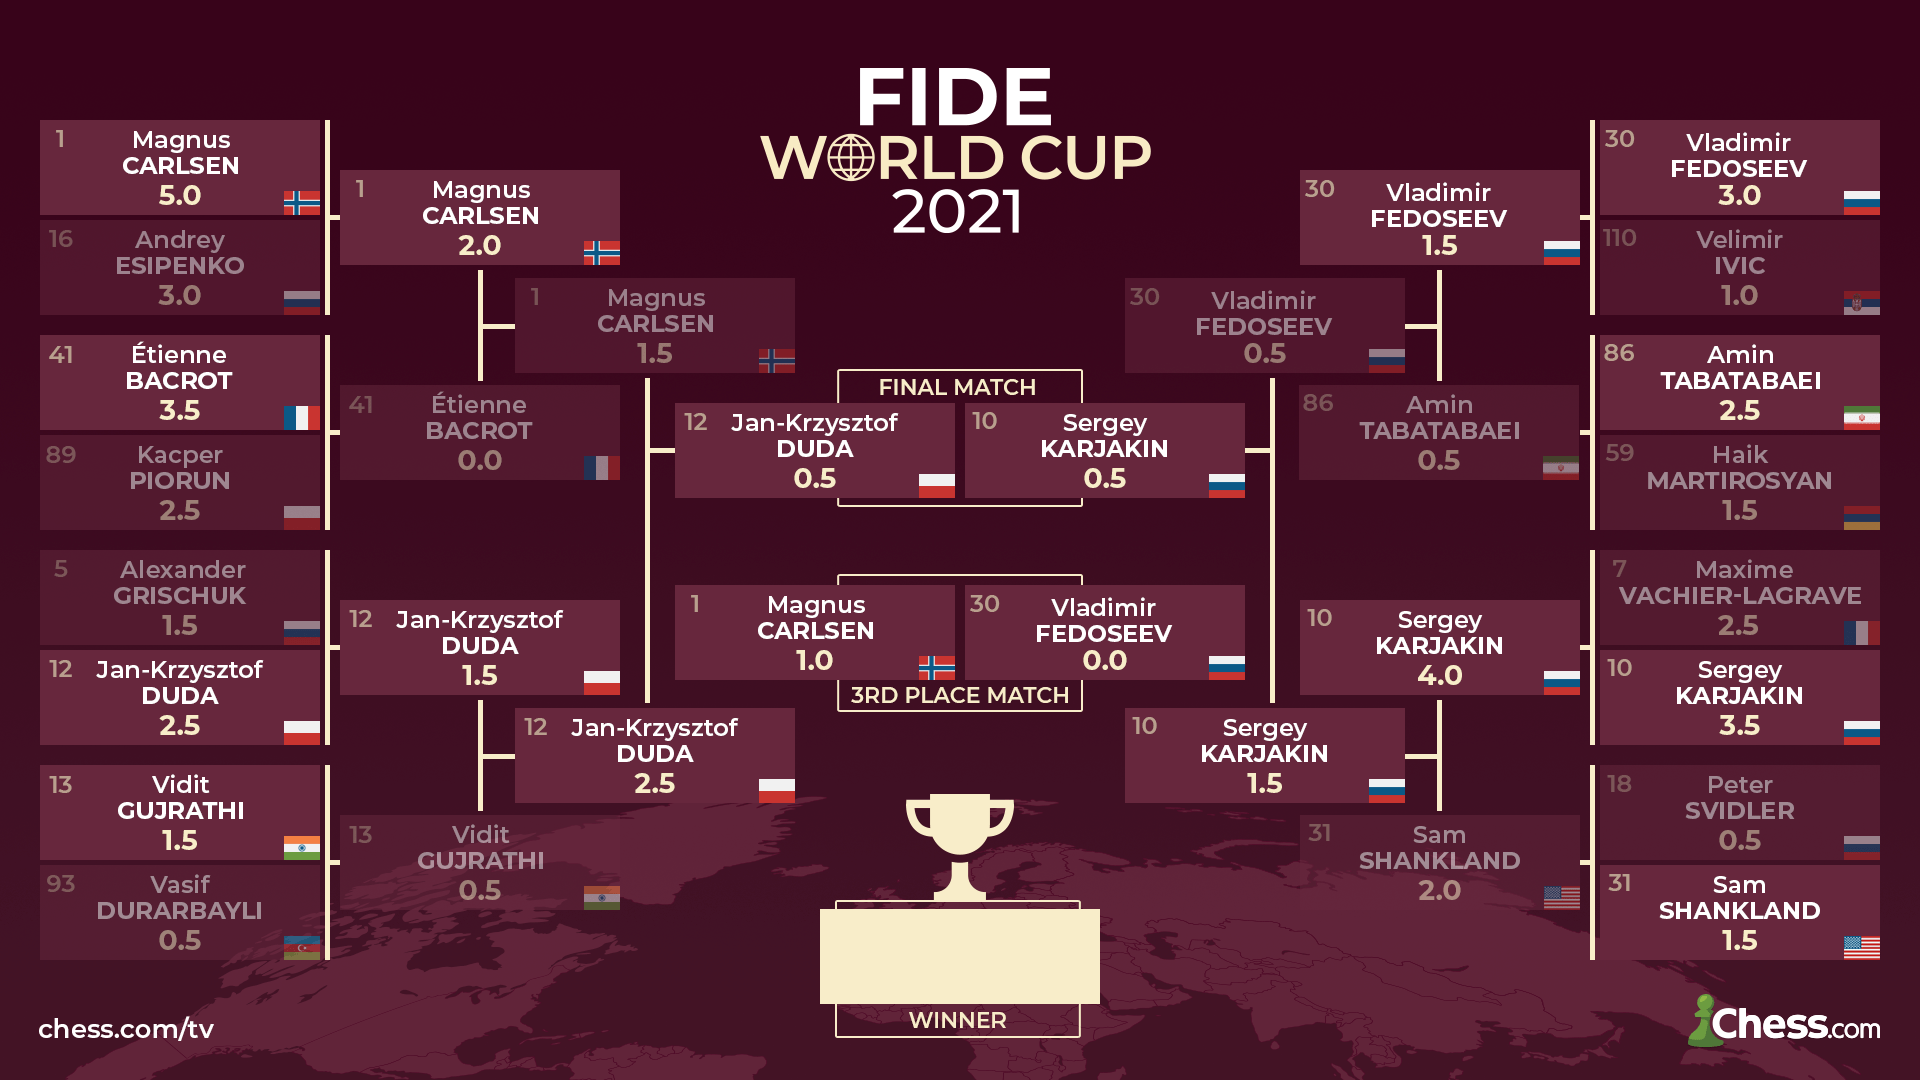 2021 FIDE World Cup results